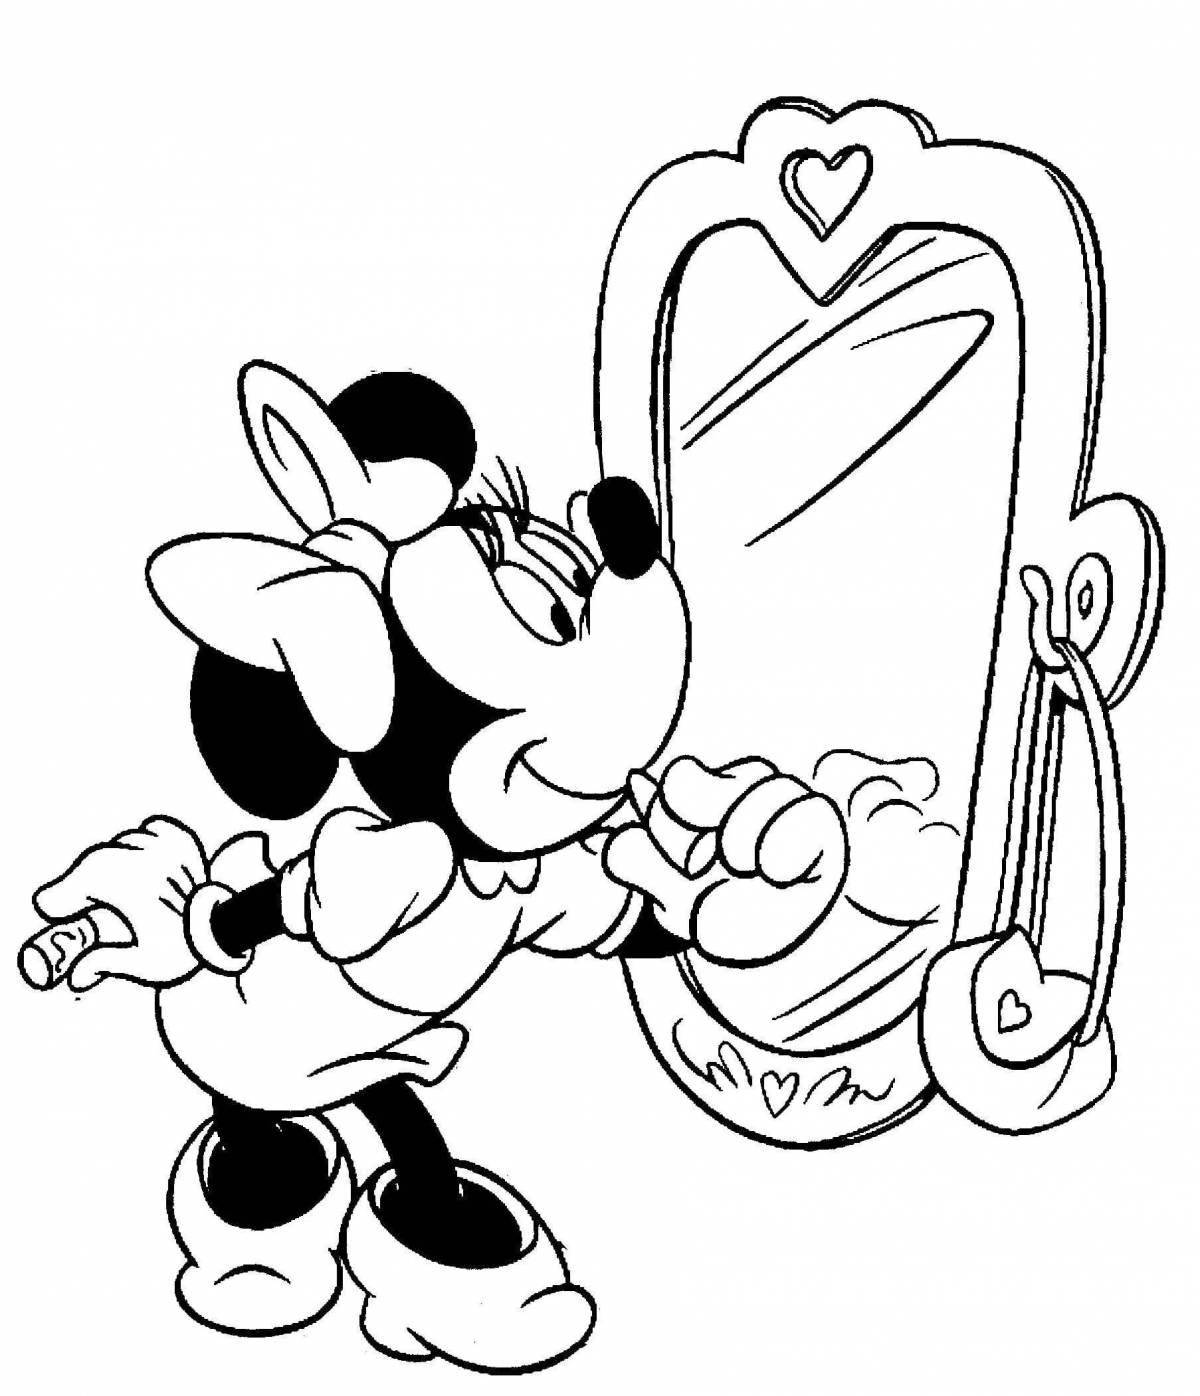 Minnie mouse humorous coloring book